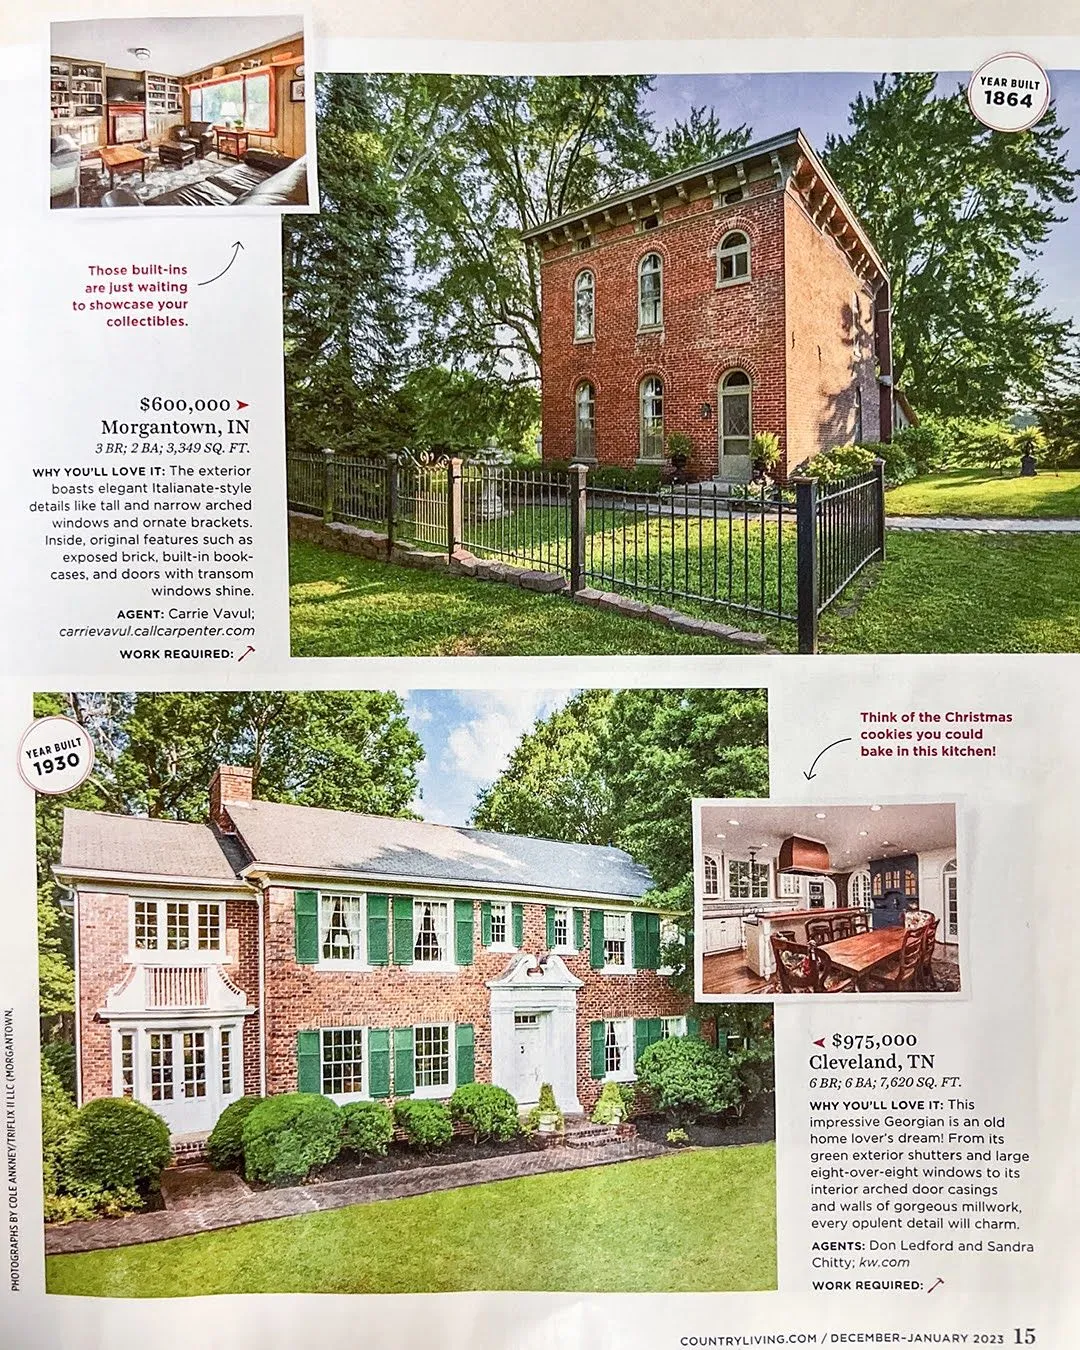 Real estate advertisement page from a magazine featuring three homes for sale, detailing their prices, locations, and unique features with interior and exterior pictures.